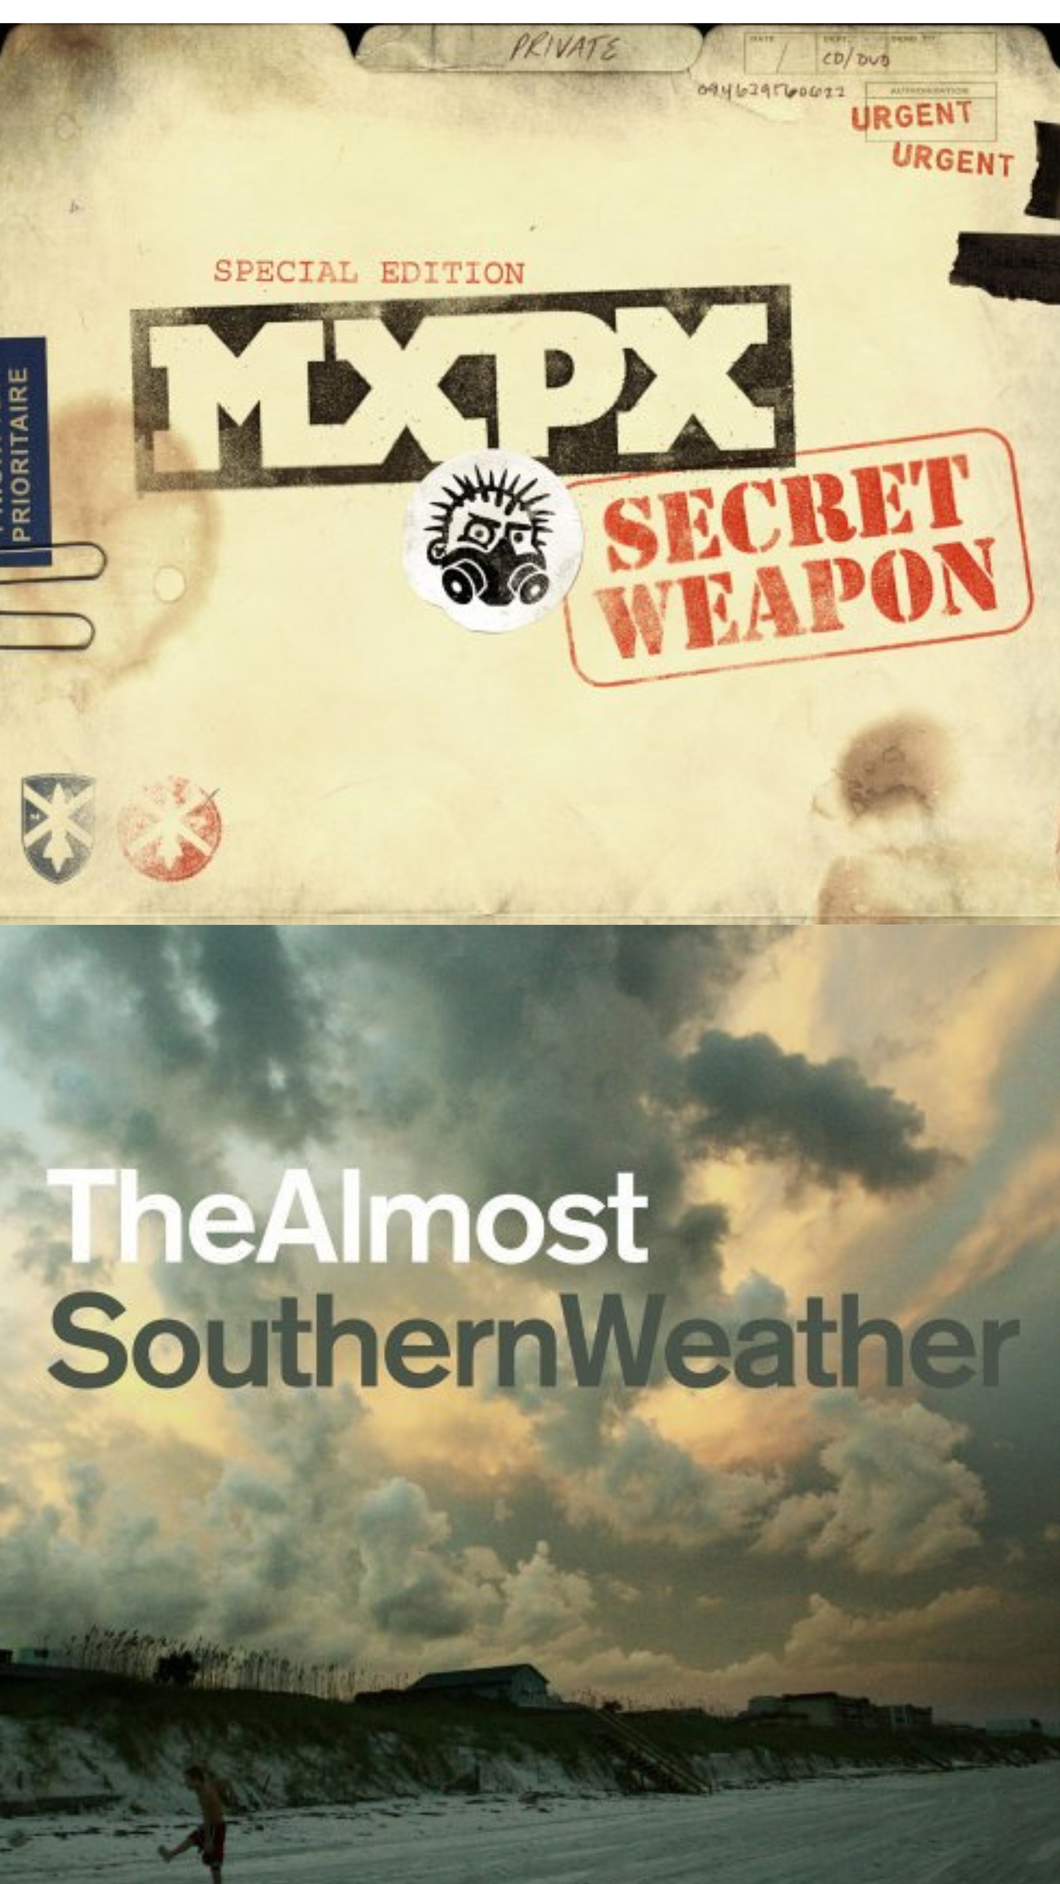 MxPx Secret Weapon Deluxe Edition + The Almost Southern Weather 2CD/DVD